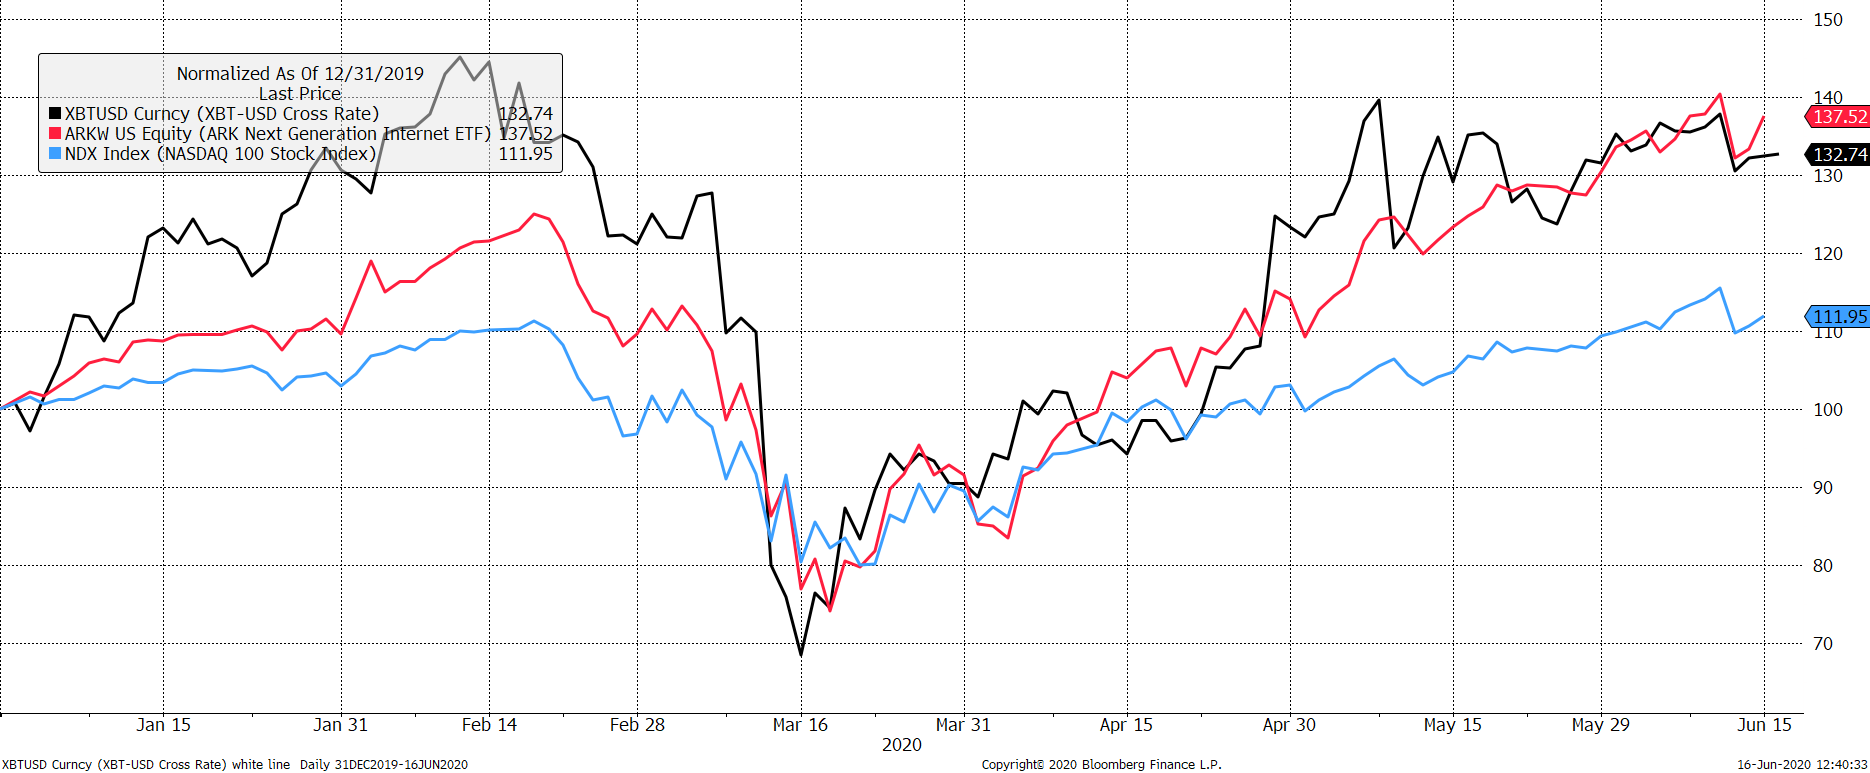 Source: Bloomberg. Bitcoin (black), Nasdaq 100 future (blue), ARKW US (red) 2020 year to date rebased to $100.